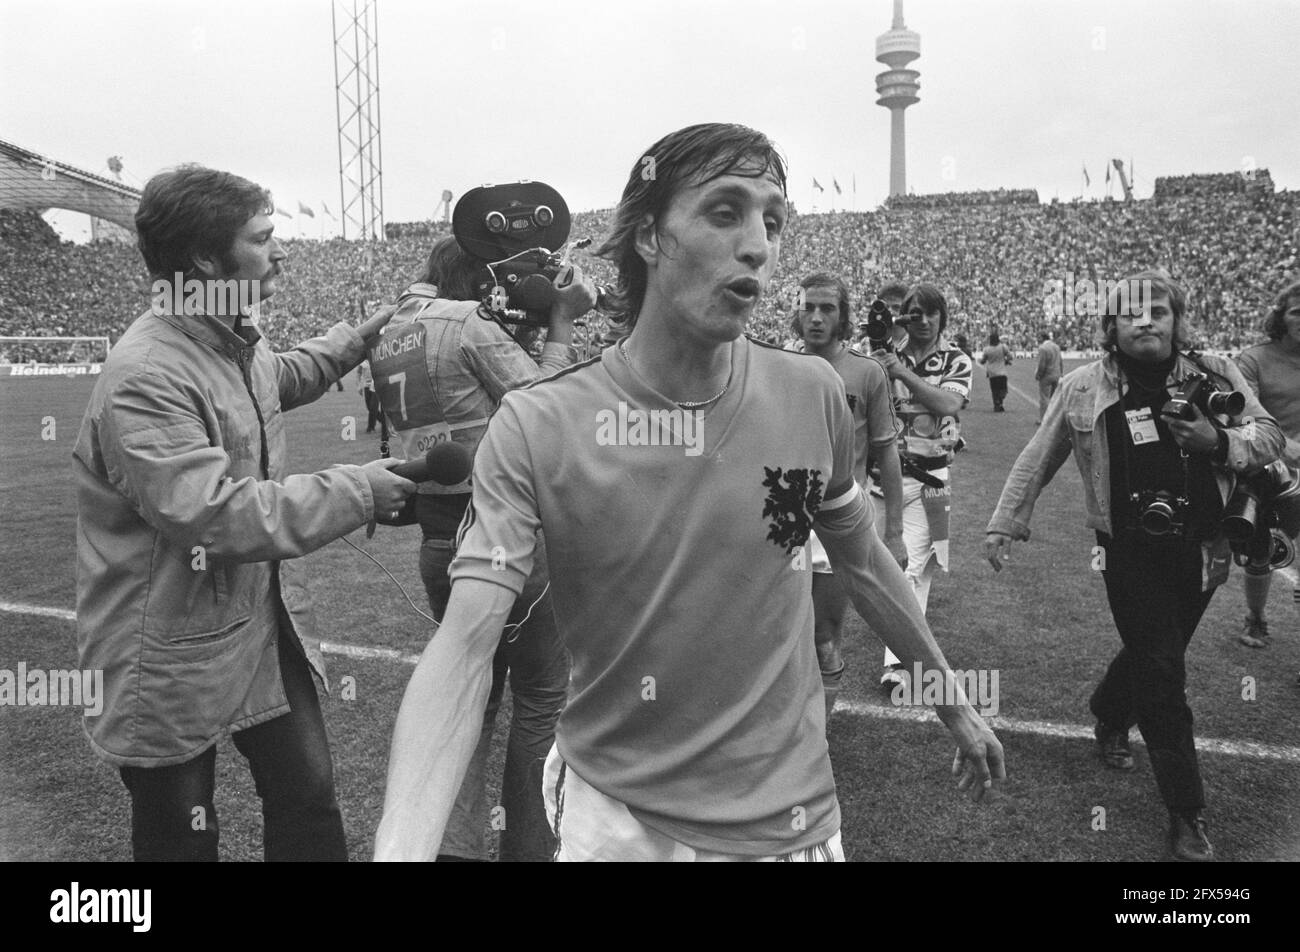 Final World Cup 1974 in Munich, West Germany against the Netherlands 2-1; defeated Johan Cruijff leaves the field afterwards, 7 July 1974, sports, soccer, world championships, The Netherlands, 20th century press agency photo, news to remember, documentary, historic photography 1945-1990, visual stories, human history of the Twentieth Century, capturing moments in time Stock Photo